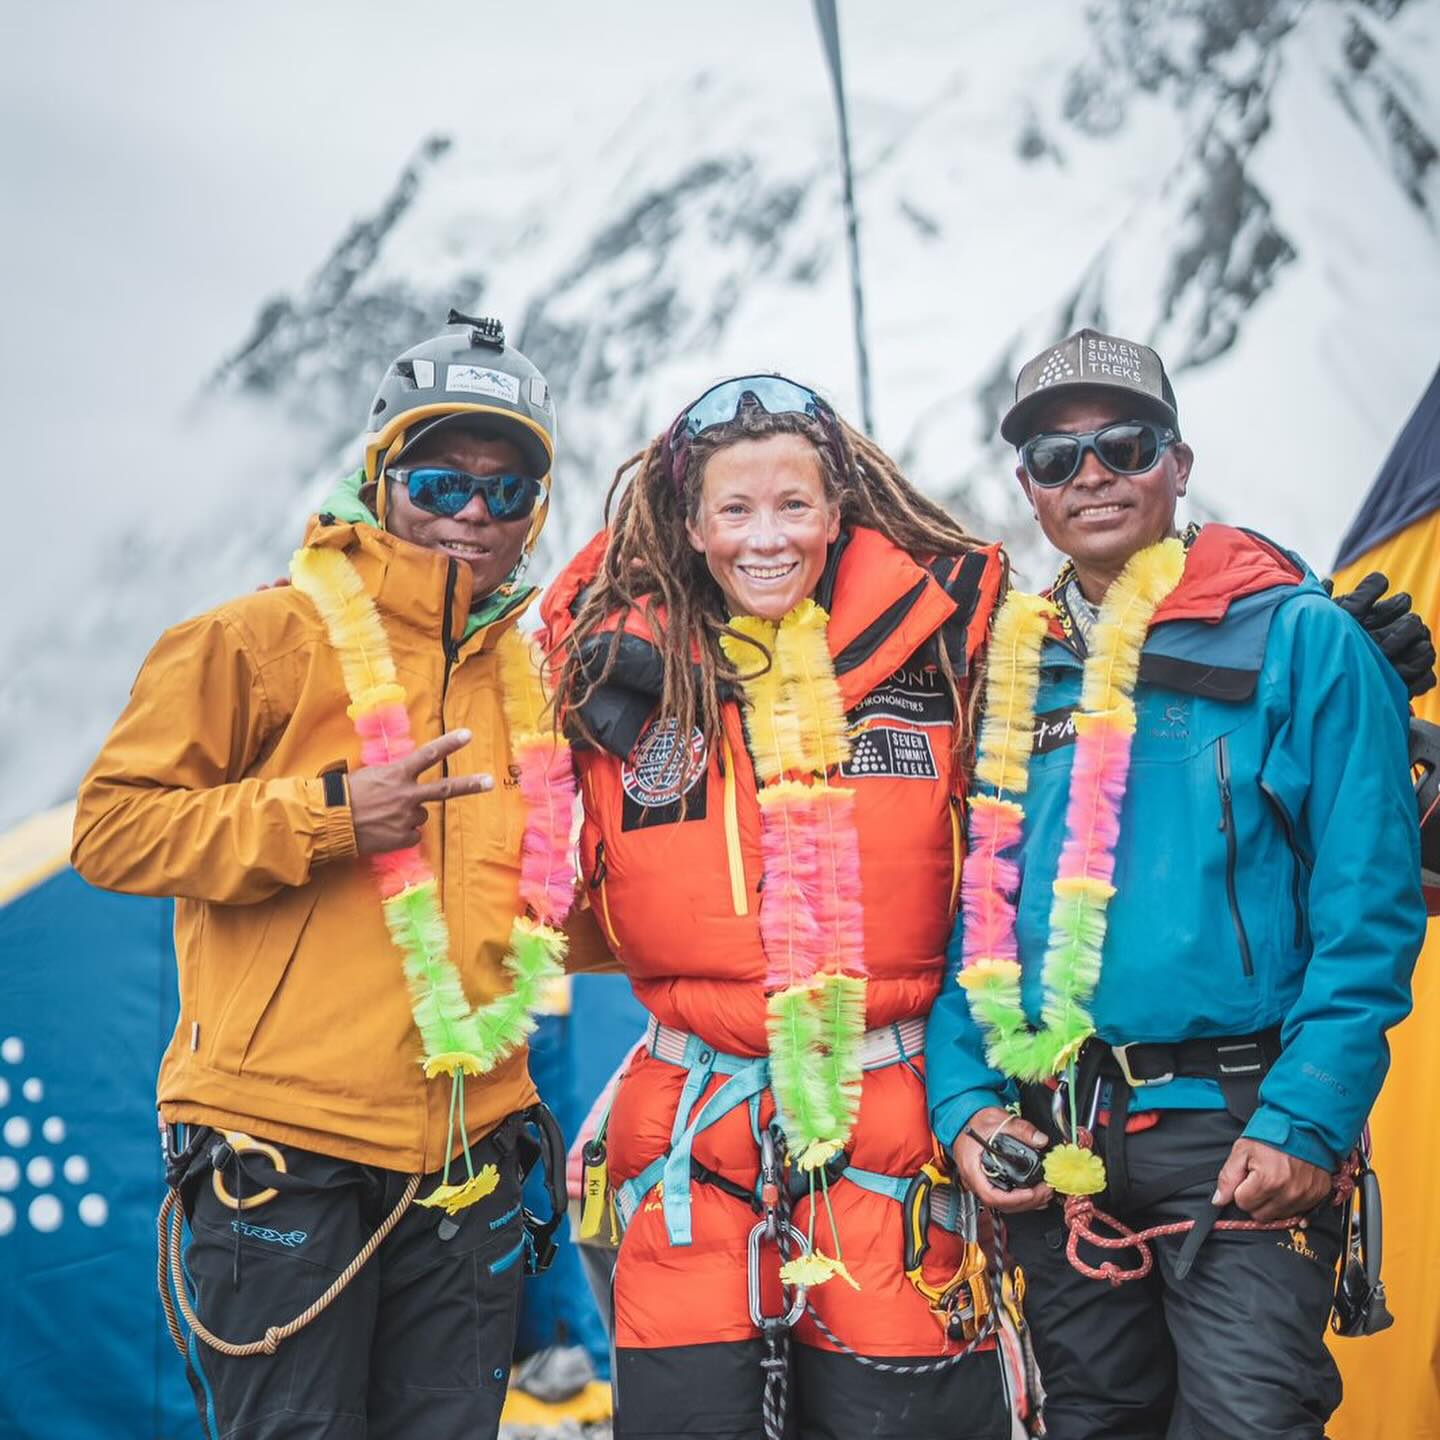 Tenjen Sherpa and Kristin Harila create history by climbing all 14 8,000m mountains in 92 days